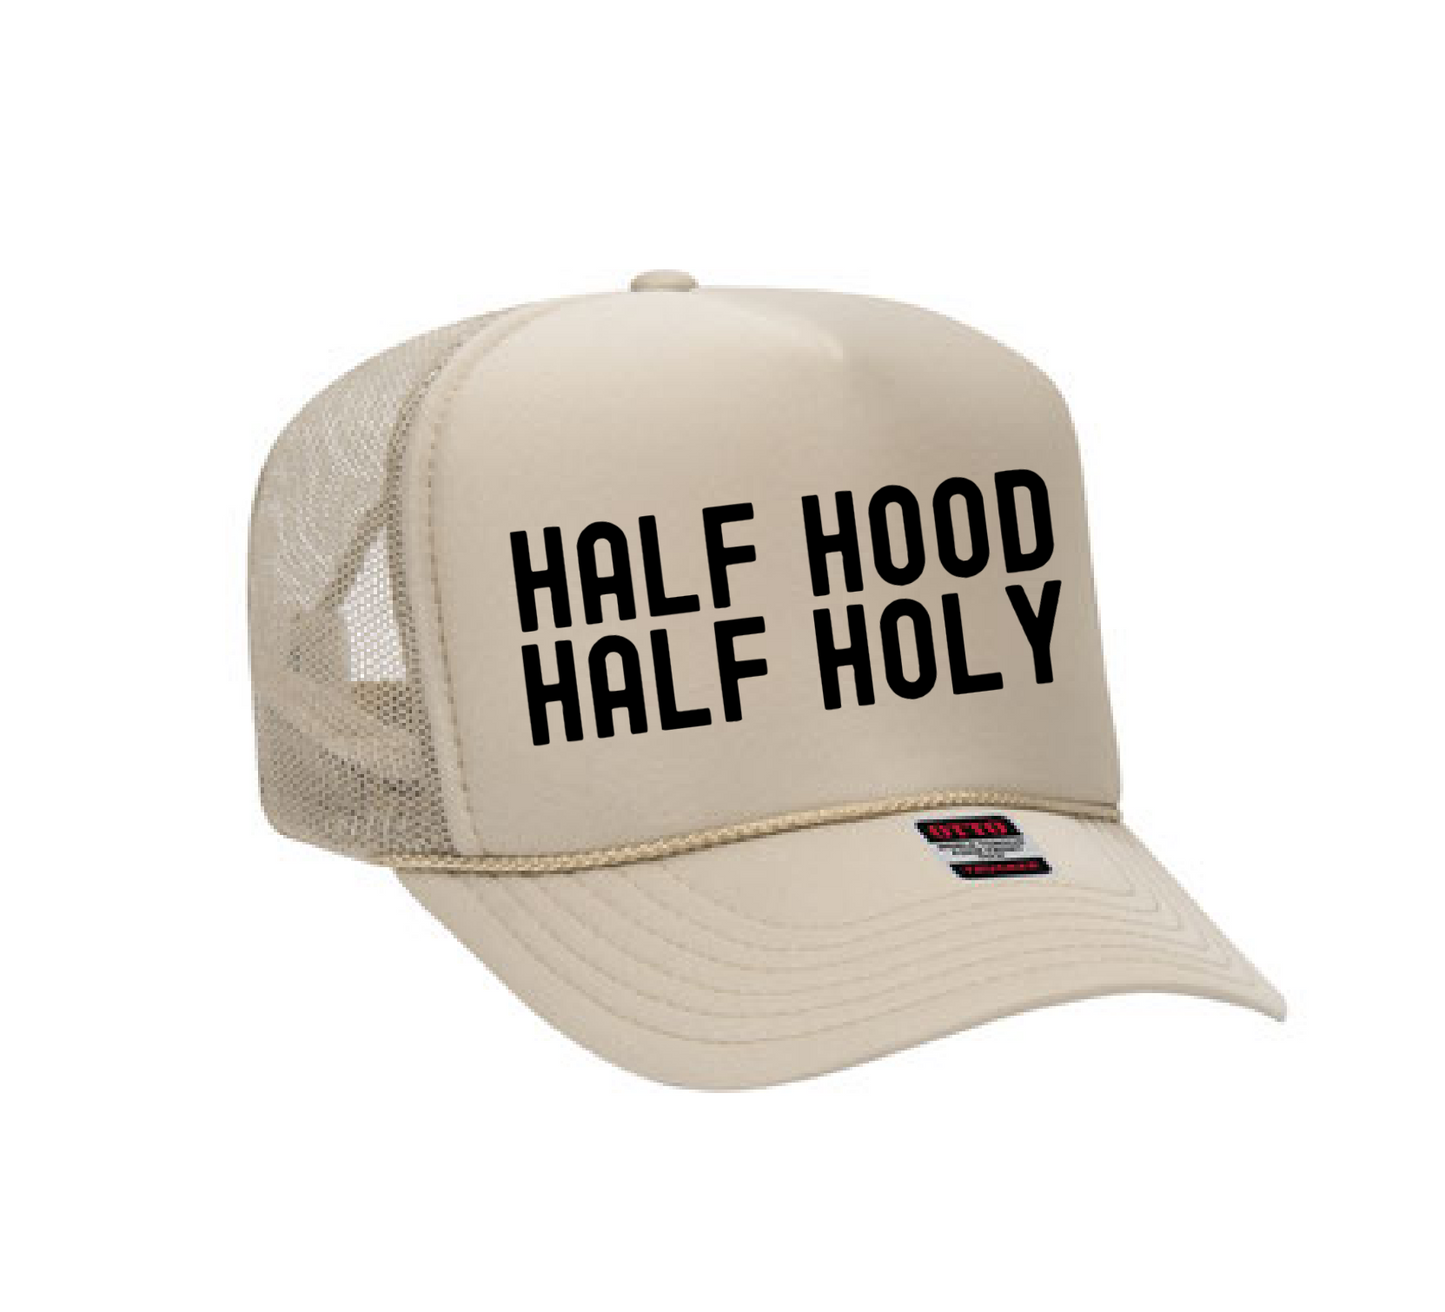 Half Hood Half Holy Trucker Hat/ Funny Gifts for Her